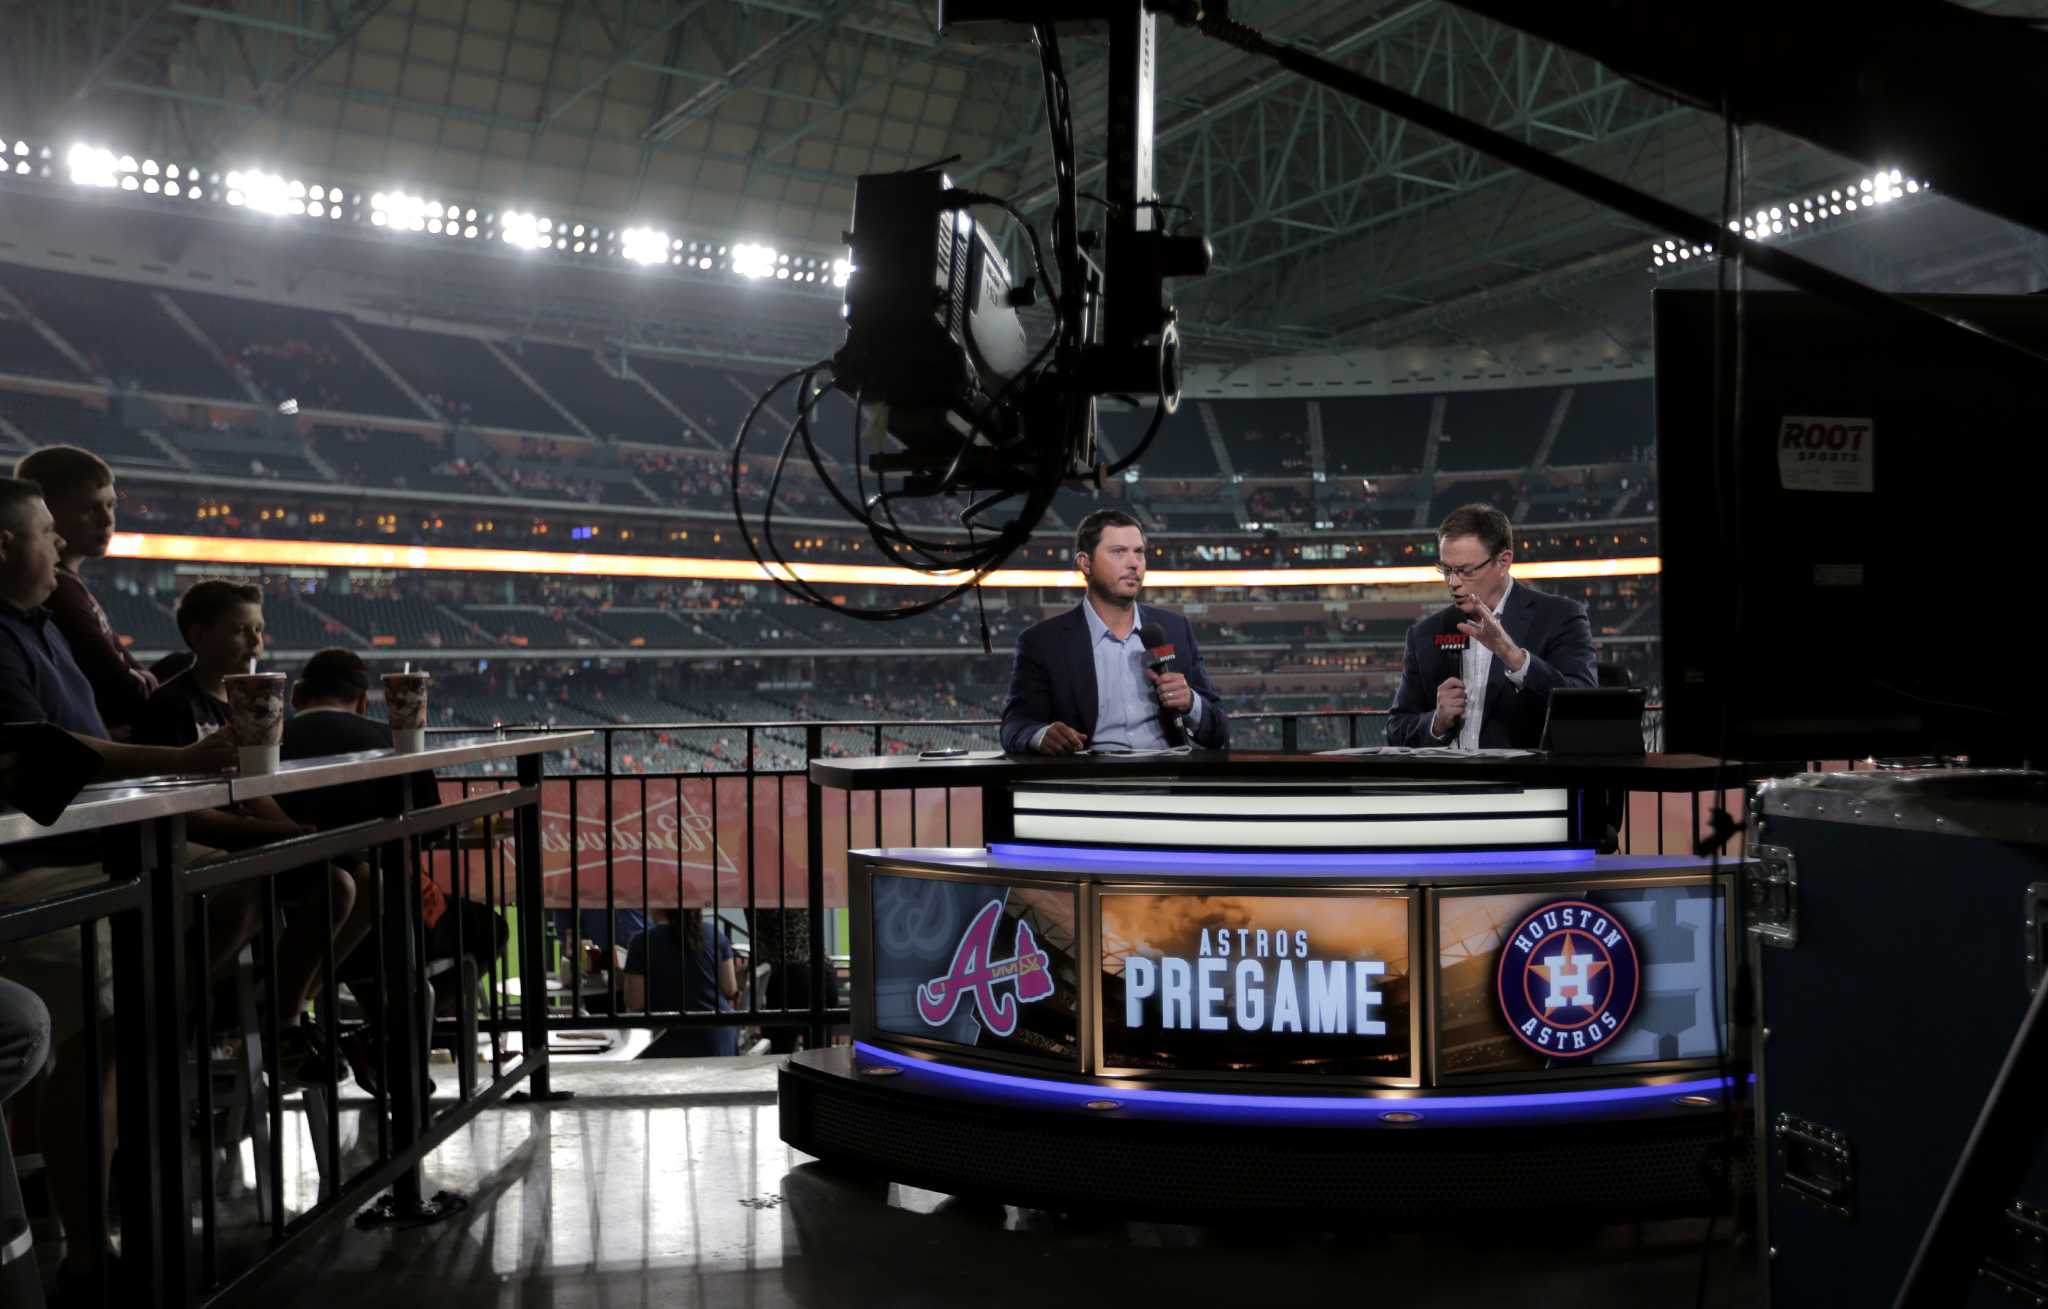 On TV/Radio: New AT&T SportsNet deal could help Astros, Rockets reach  younger fans